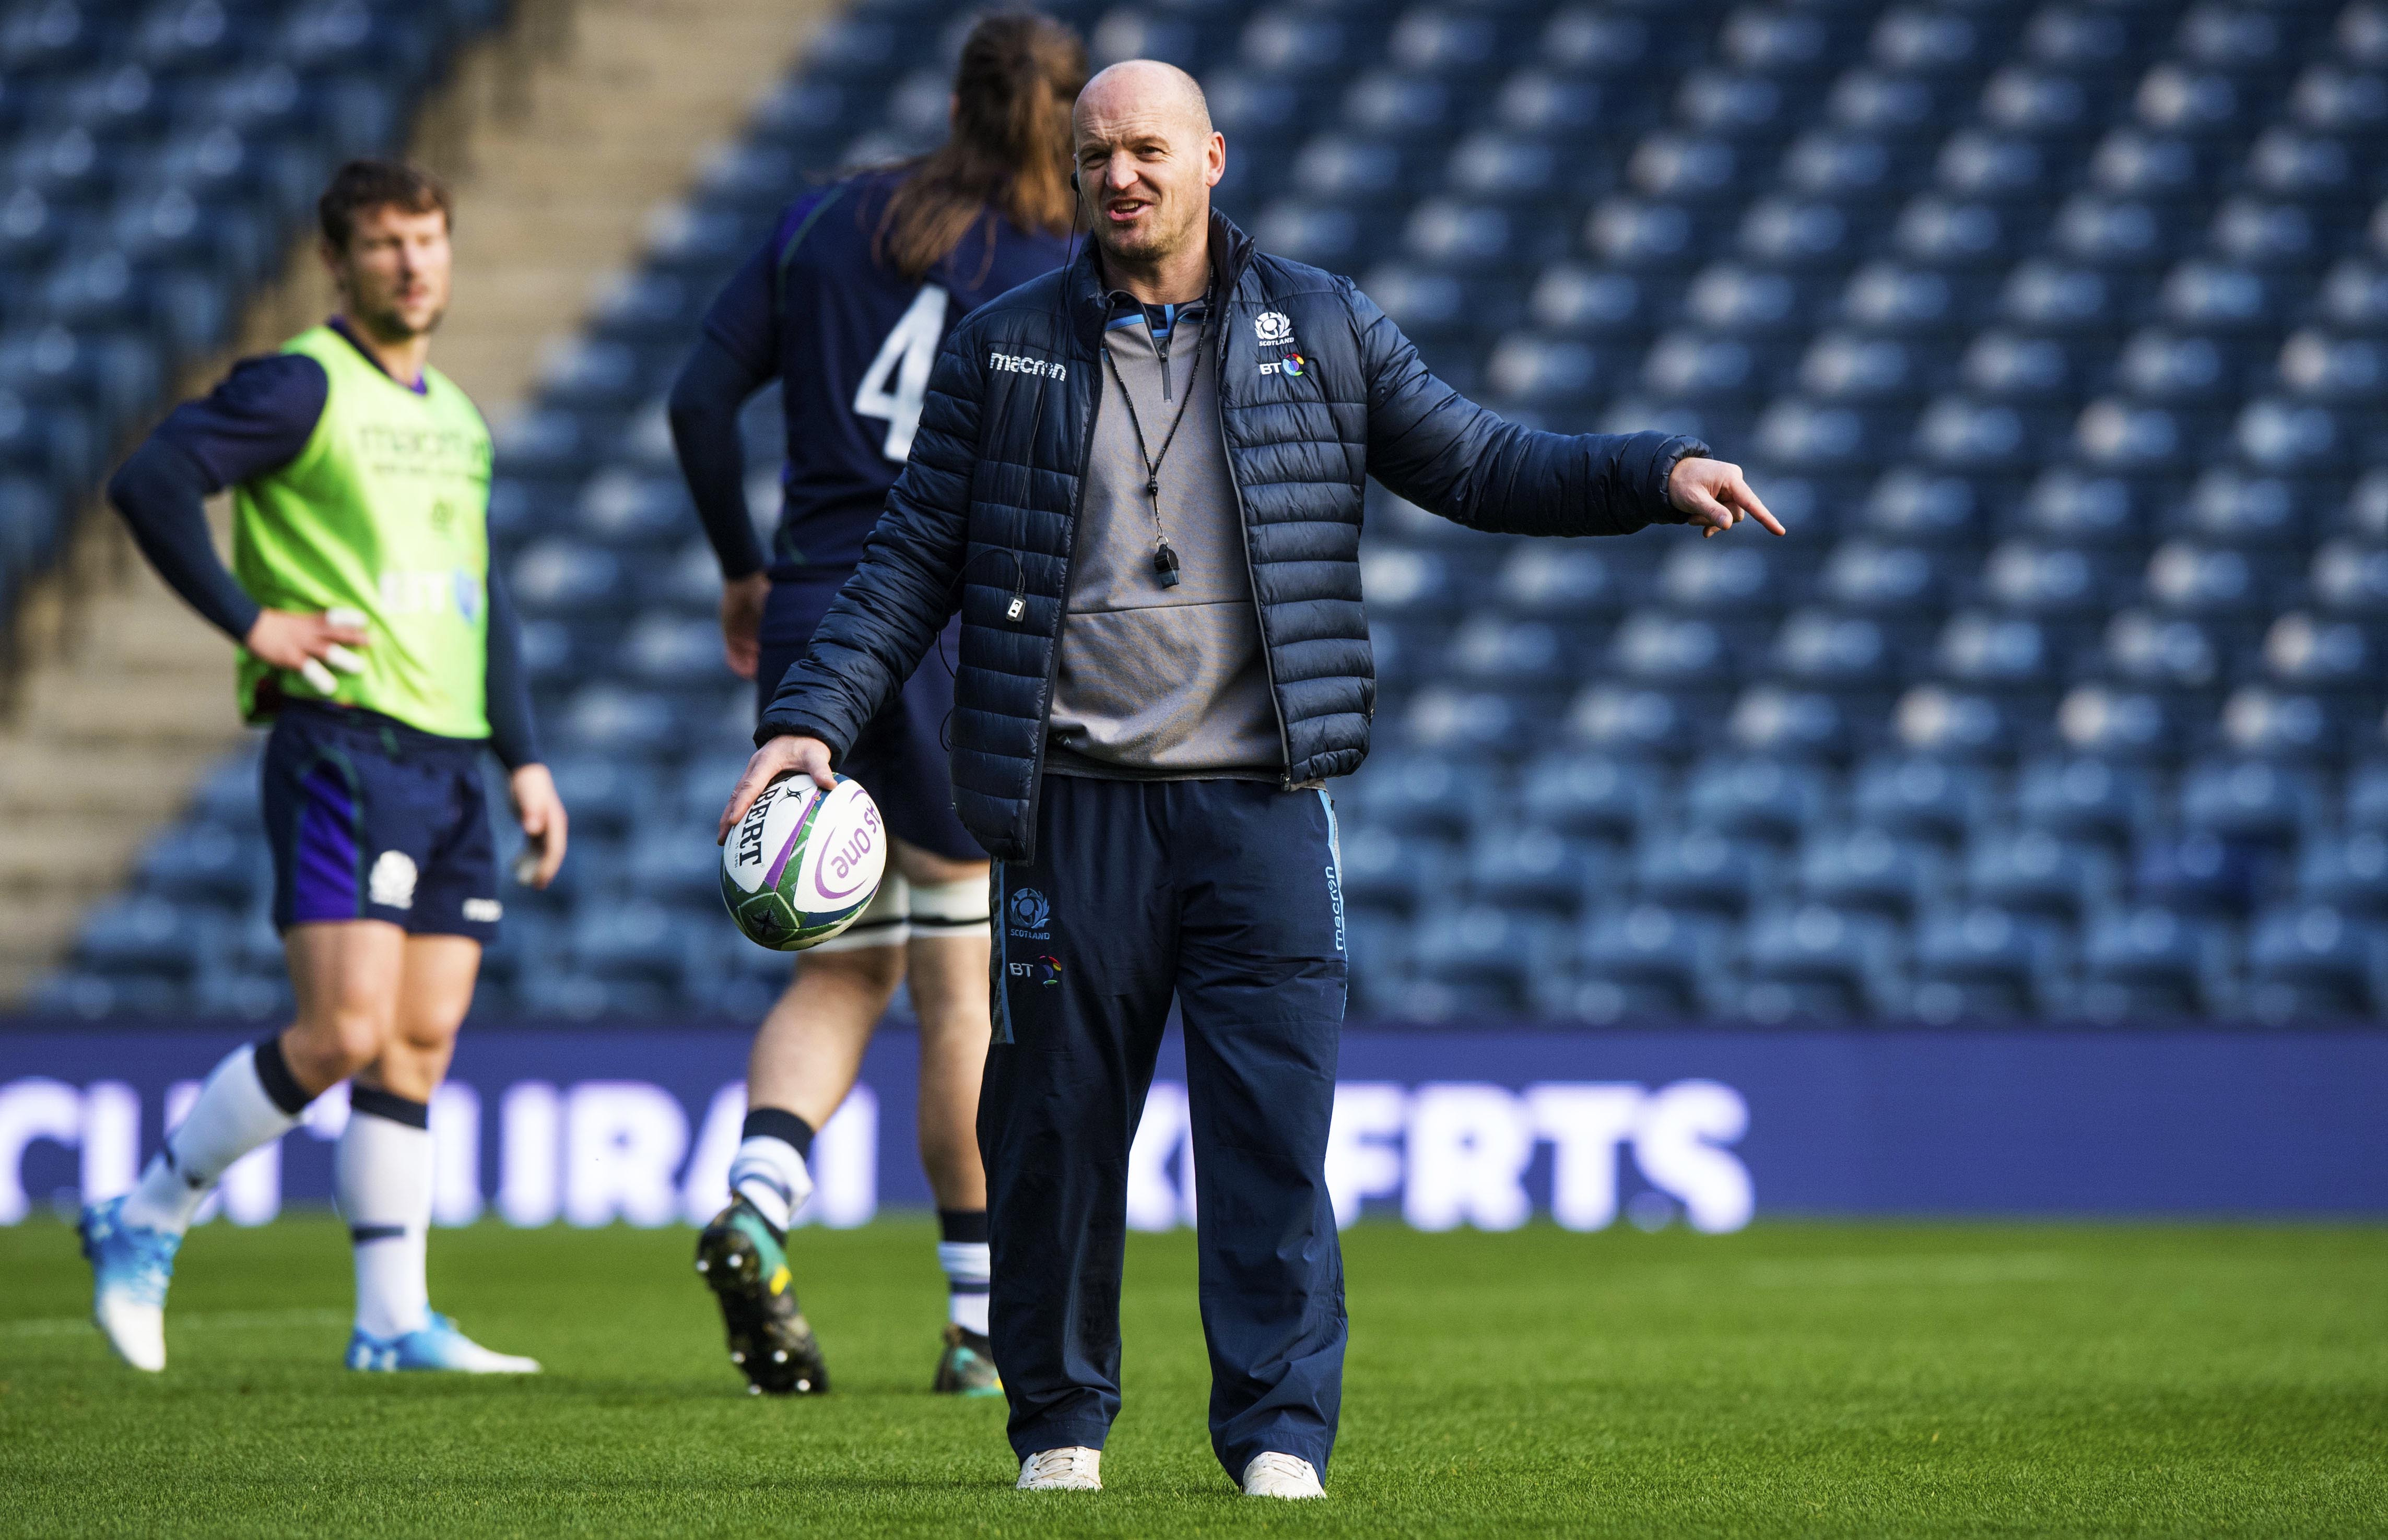 Gregor Townsend's fast-paced style will need to cope with South Africa's power at Murrayfield.